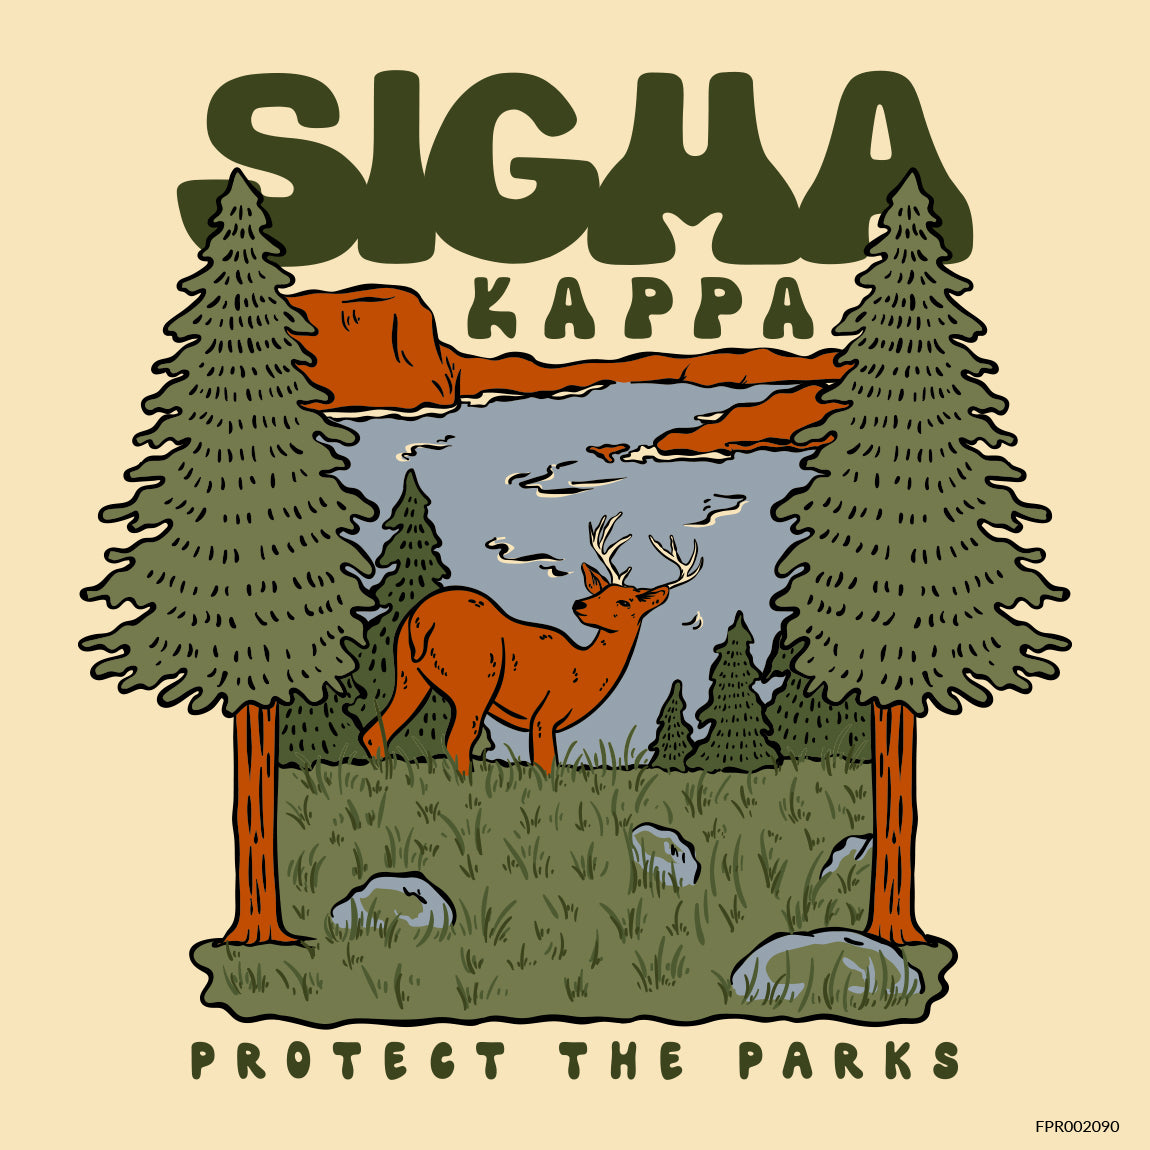 Protect the Parks